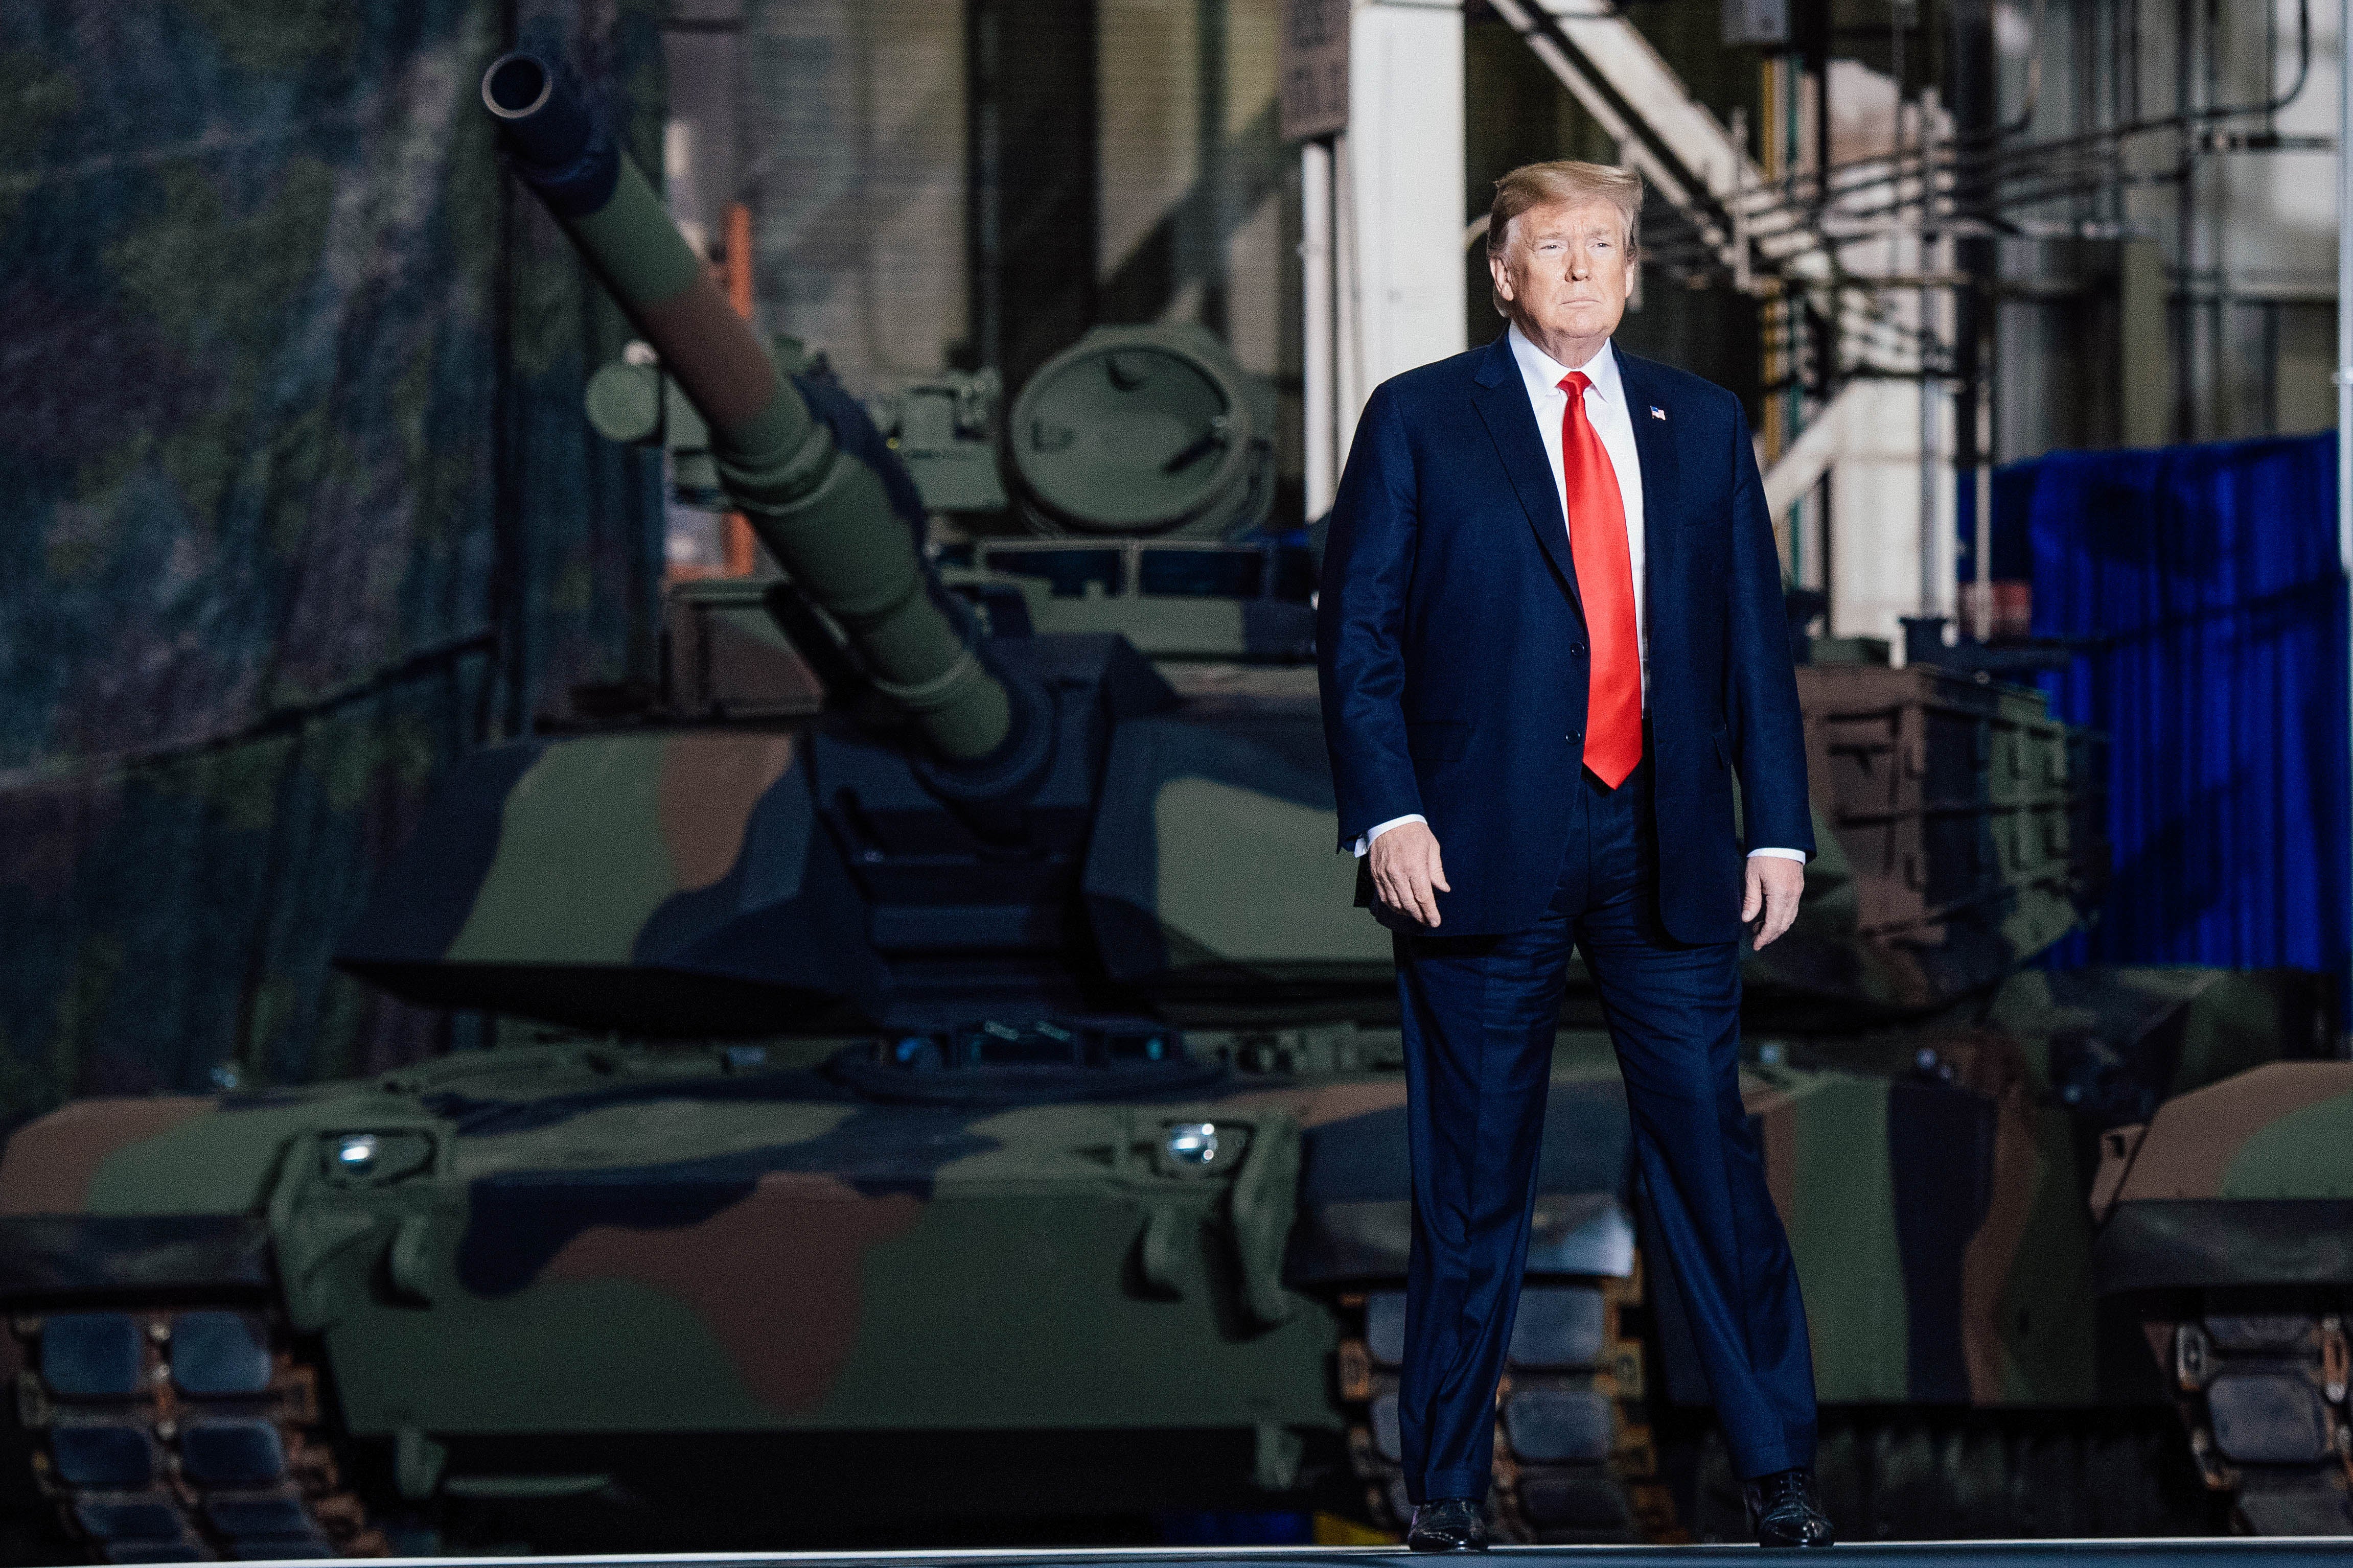 President Donald Trump arrives to speak after touring the Lima Army Tank Plant in Ohio on March 20.